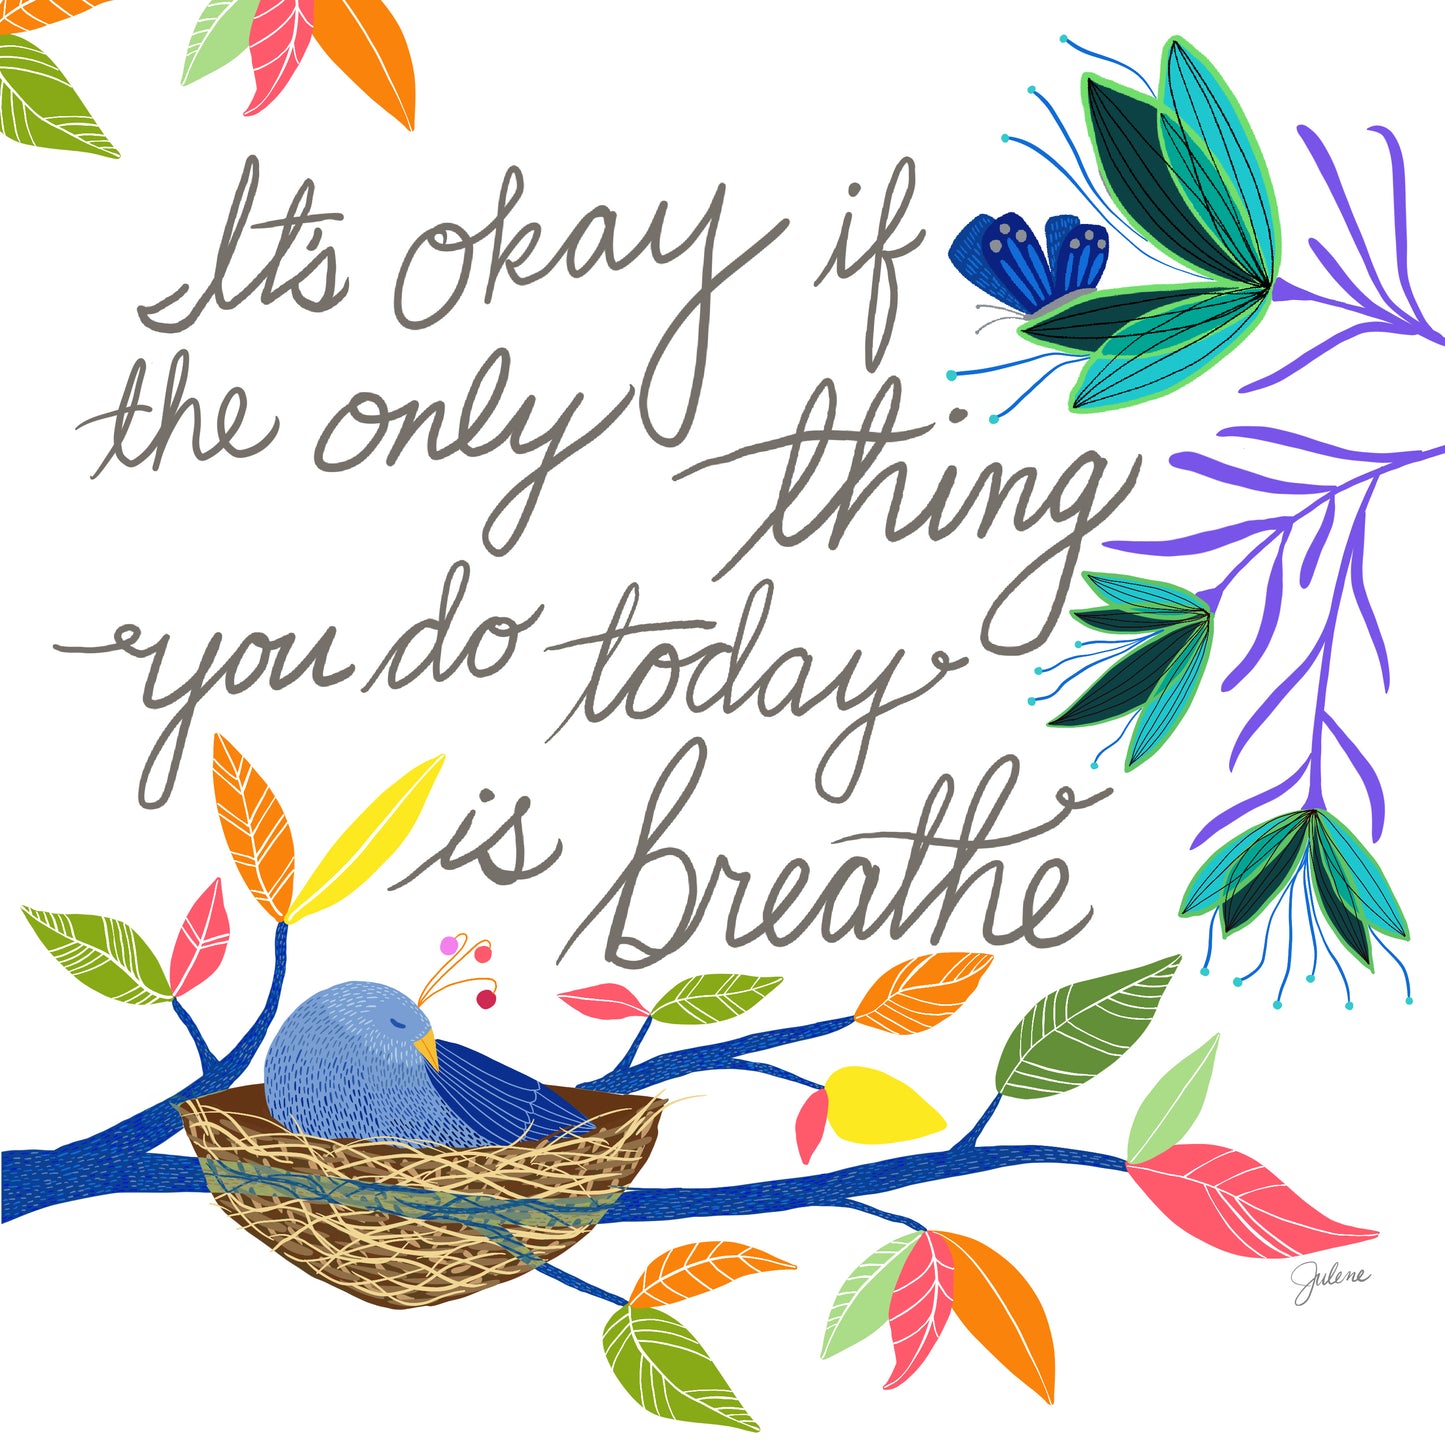 It's okay if the only thing you do today is breathe - Print